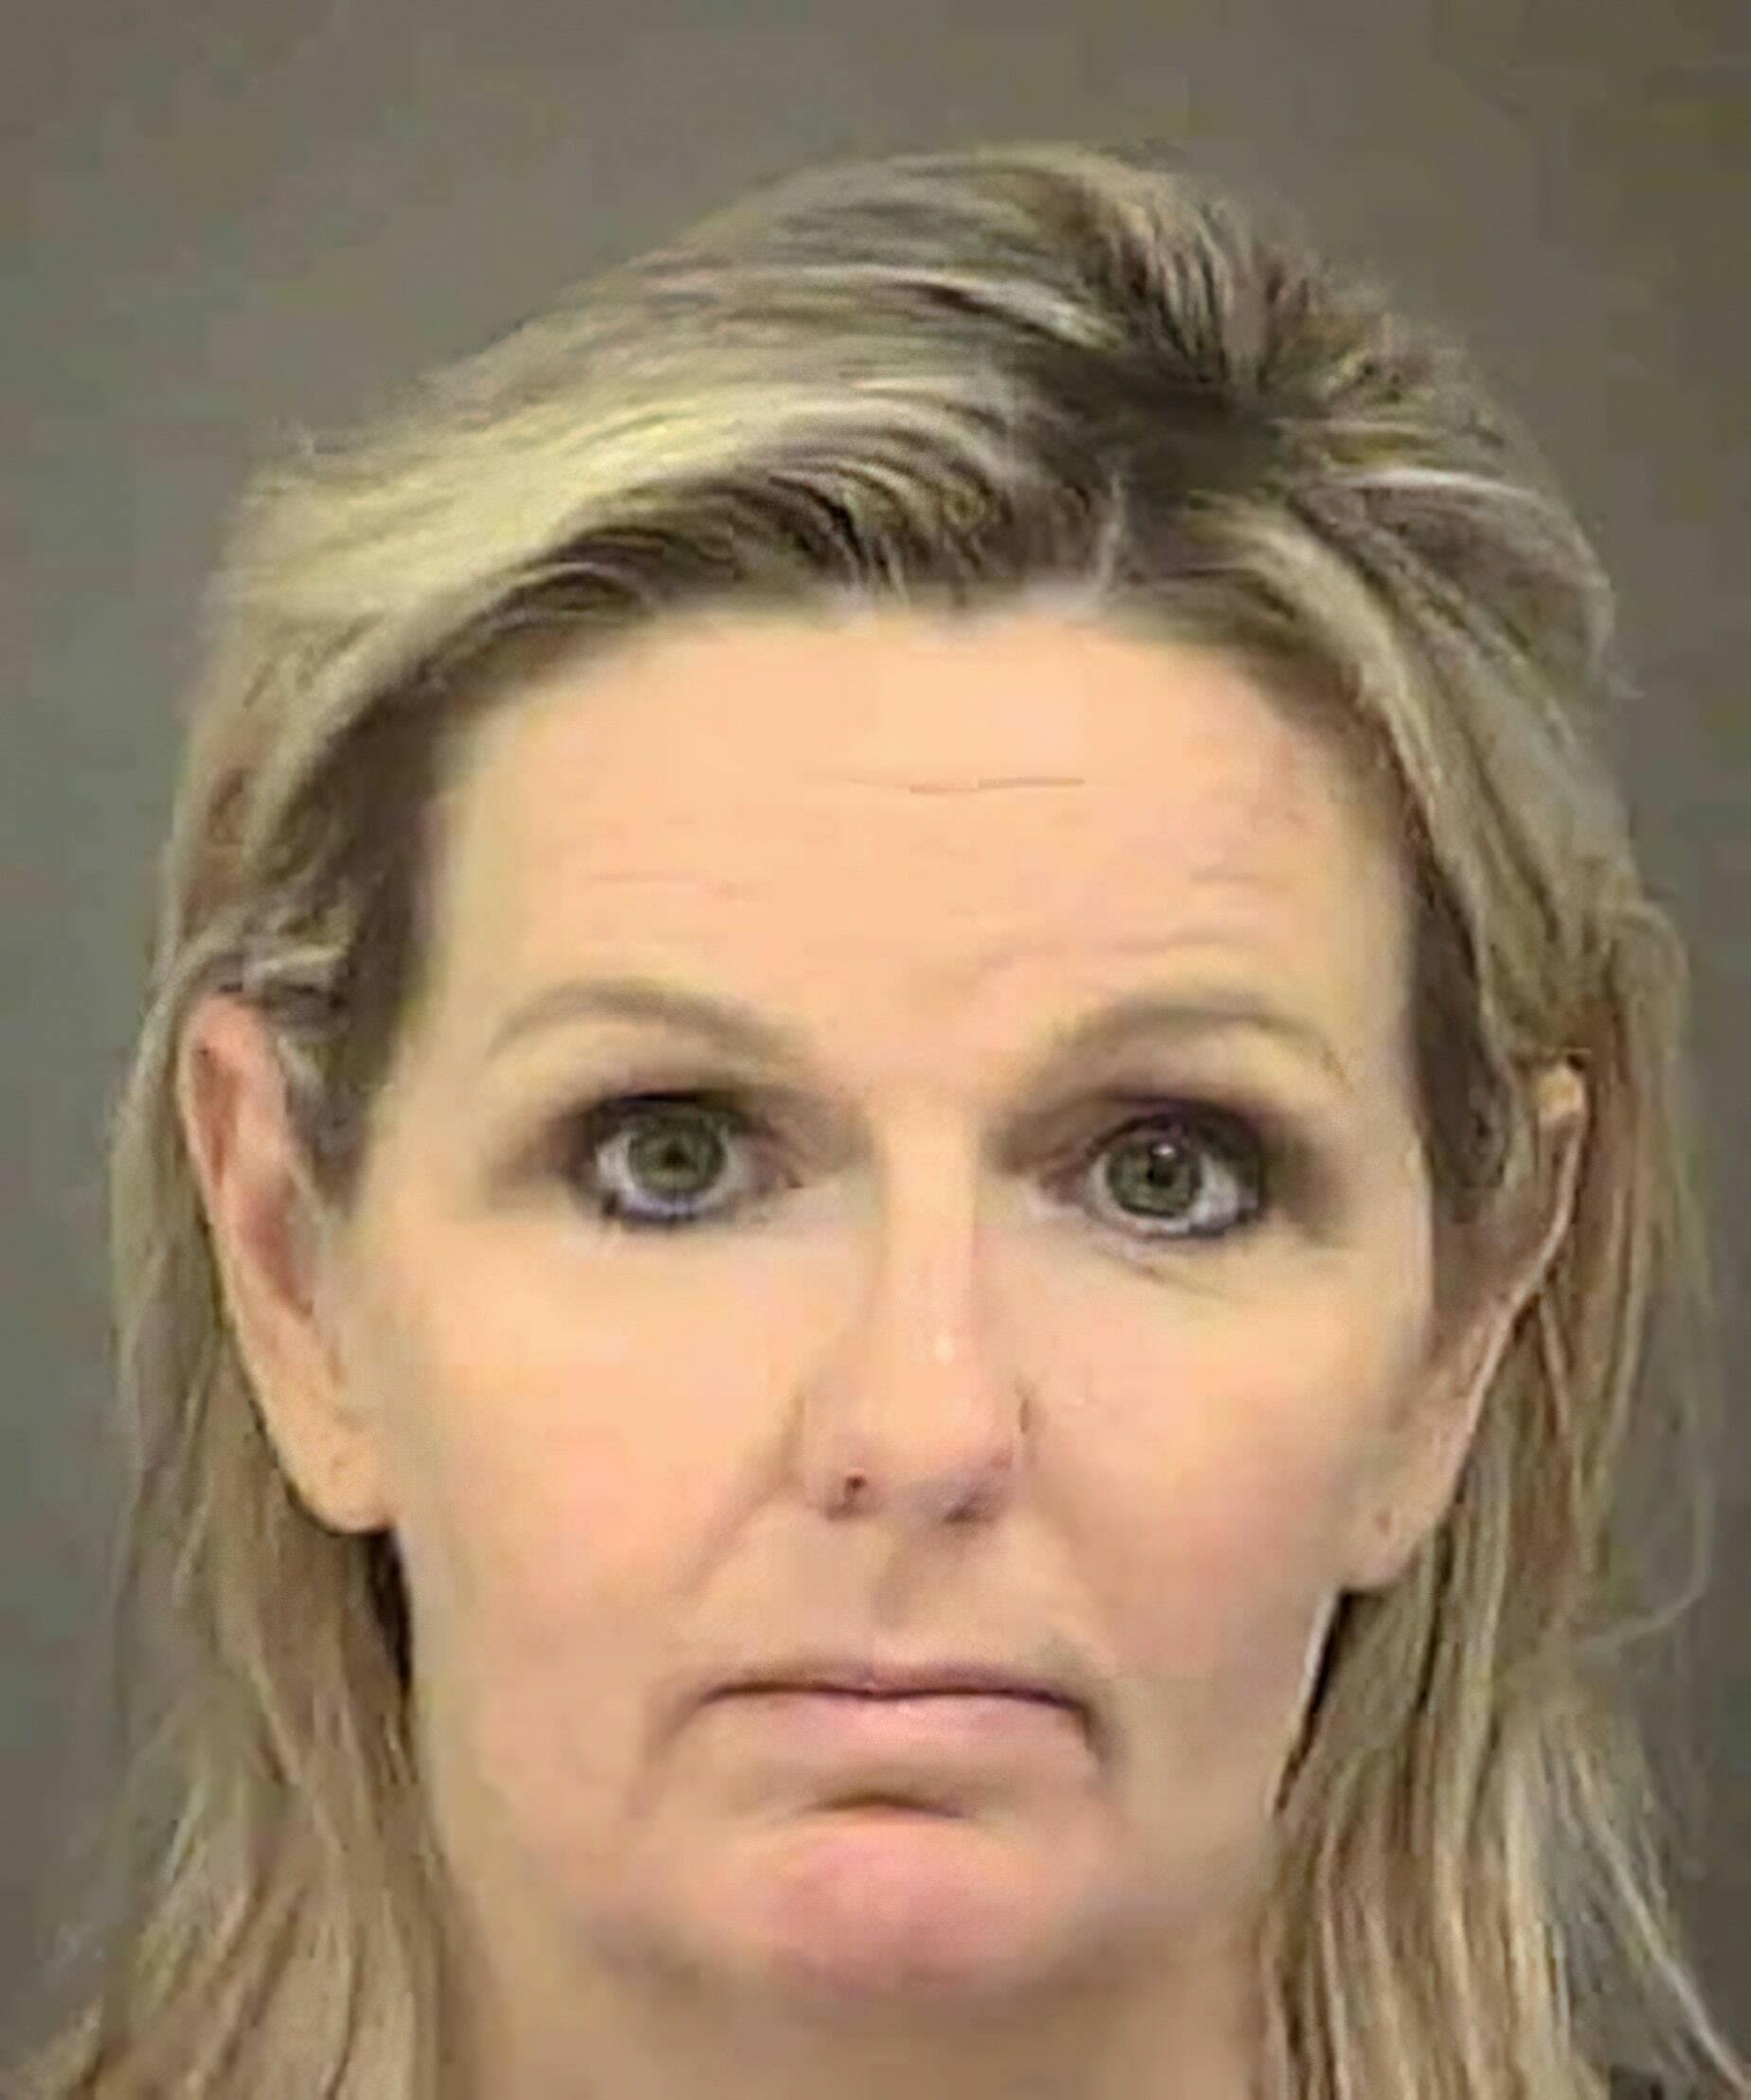 NC's Angela Nicole Brown stole $400,000 from dentist, spent it on Disney World and other vacations. Sentenced to five years.